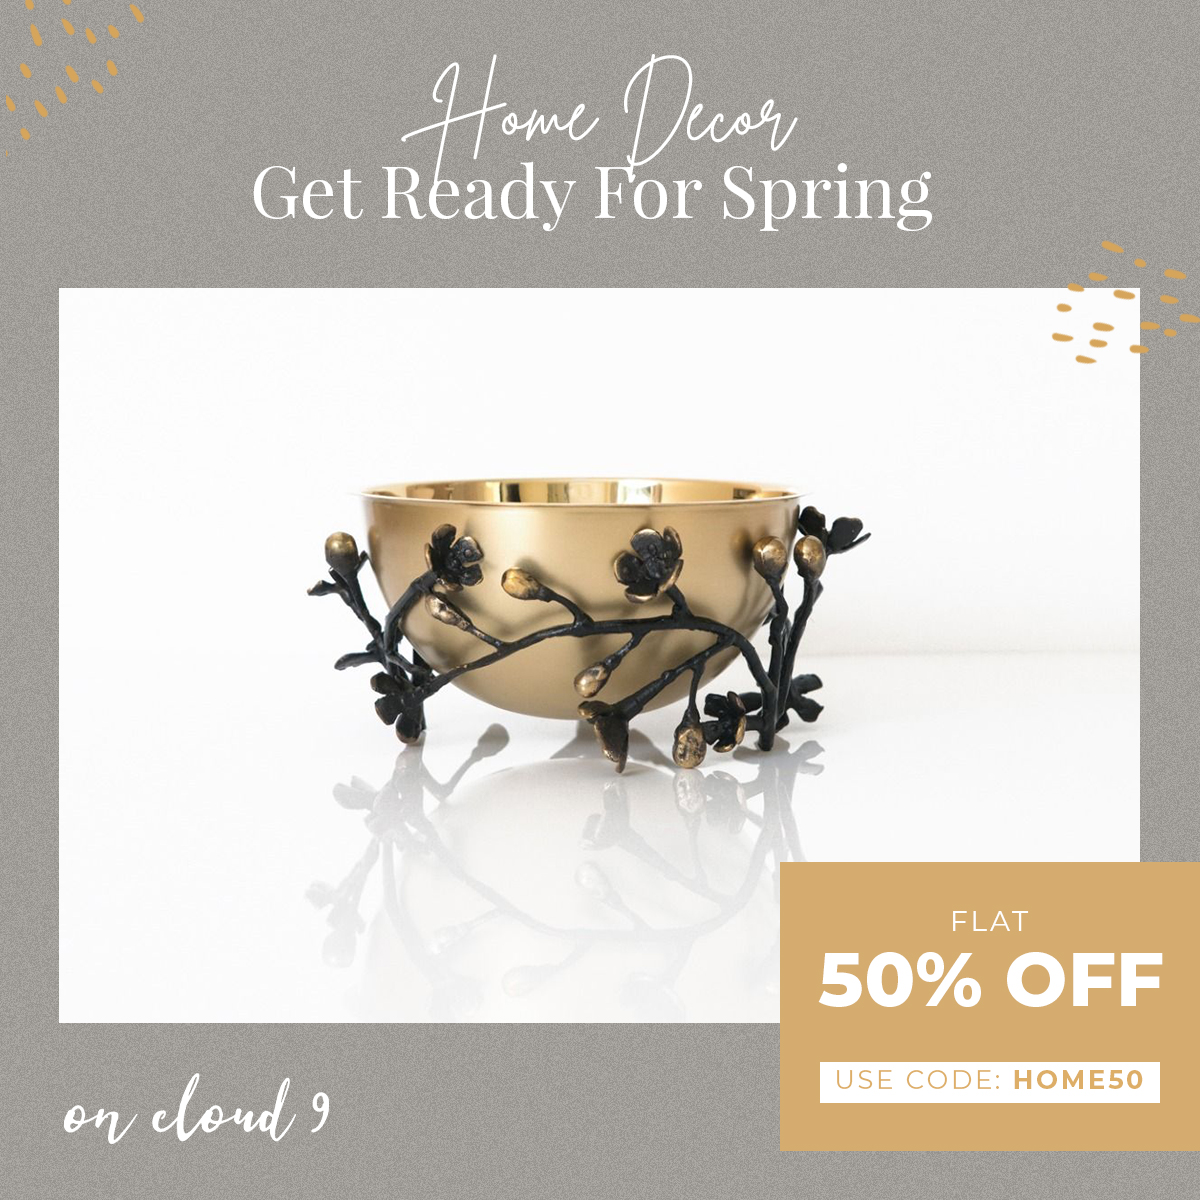 Our glam home decor pieces are on sale.

Flat 50% off on home decor.

Use code: HOME50
.
.
.
.
#sale #glamsale #homedecor #oncloud9shoppe #candleholders #decor #glam #modern #handcraftedwithlove #handcraftedhomedecor